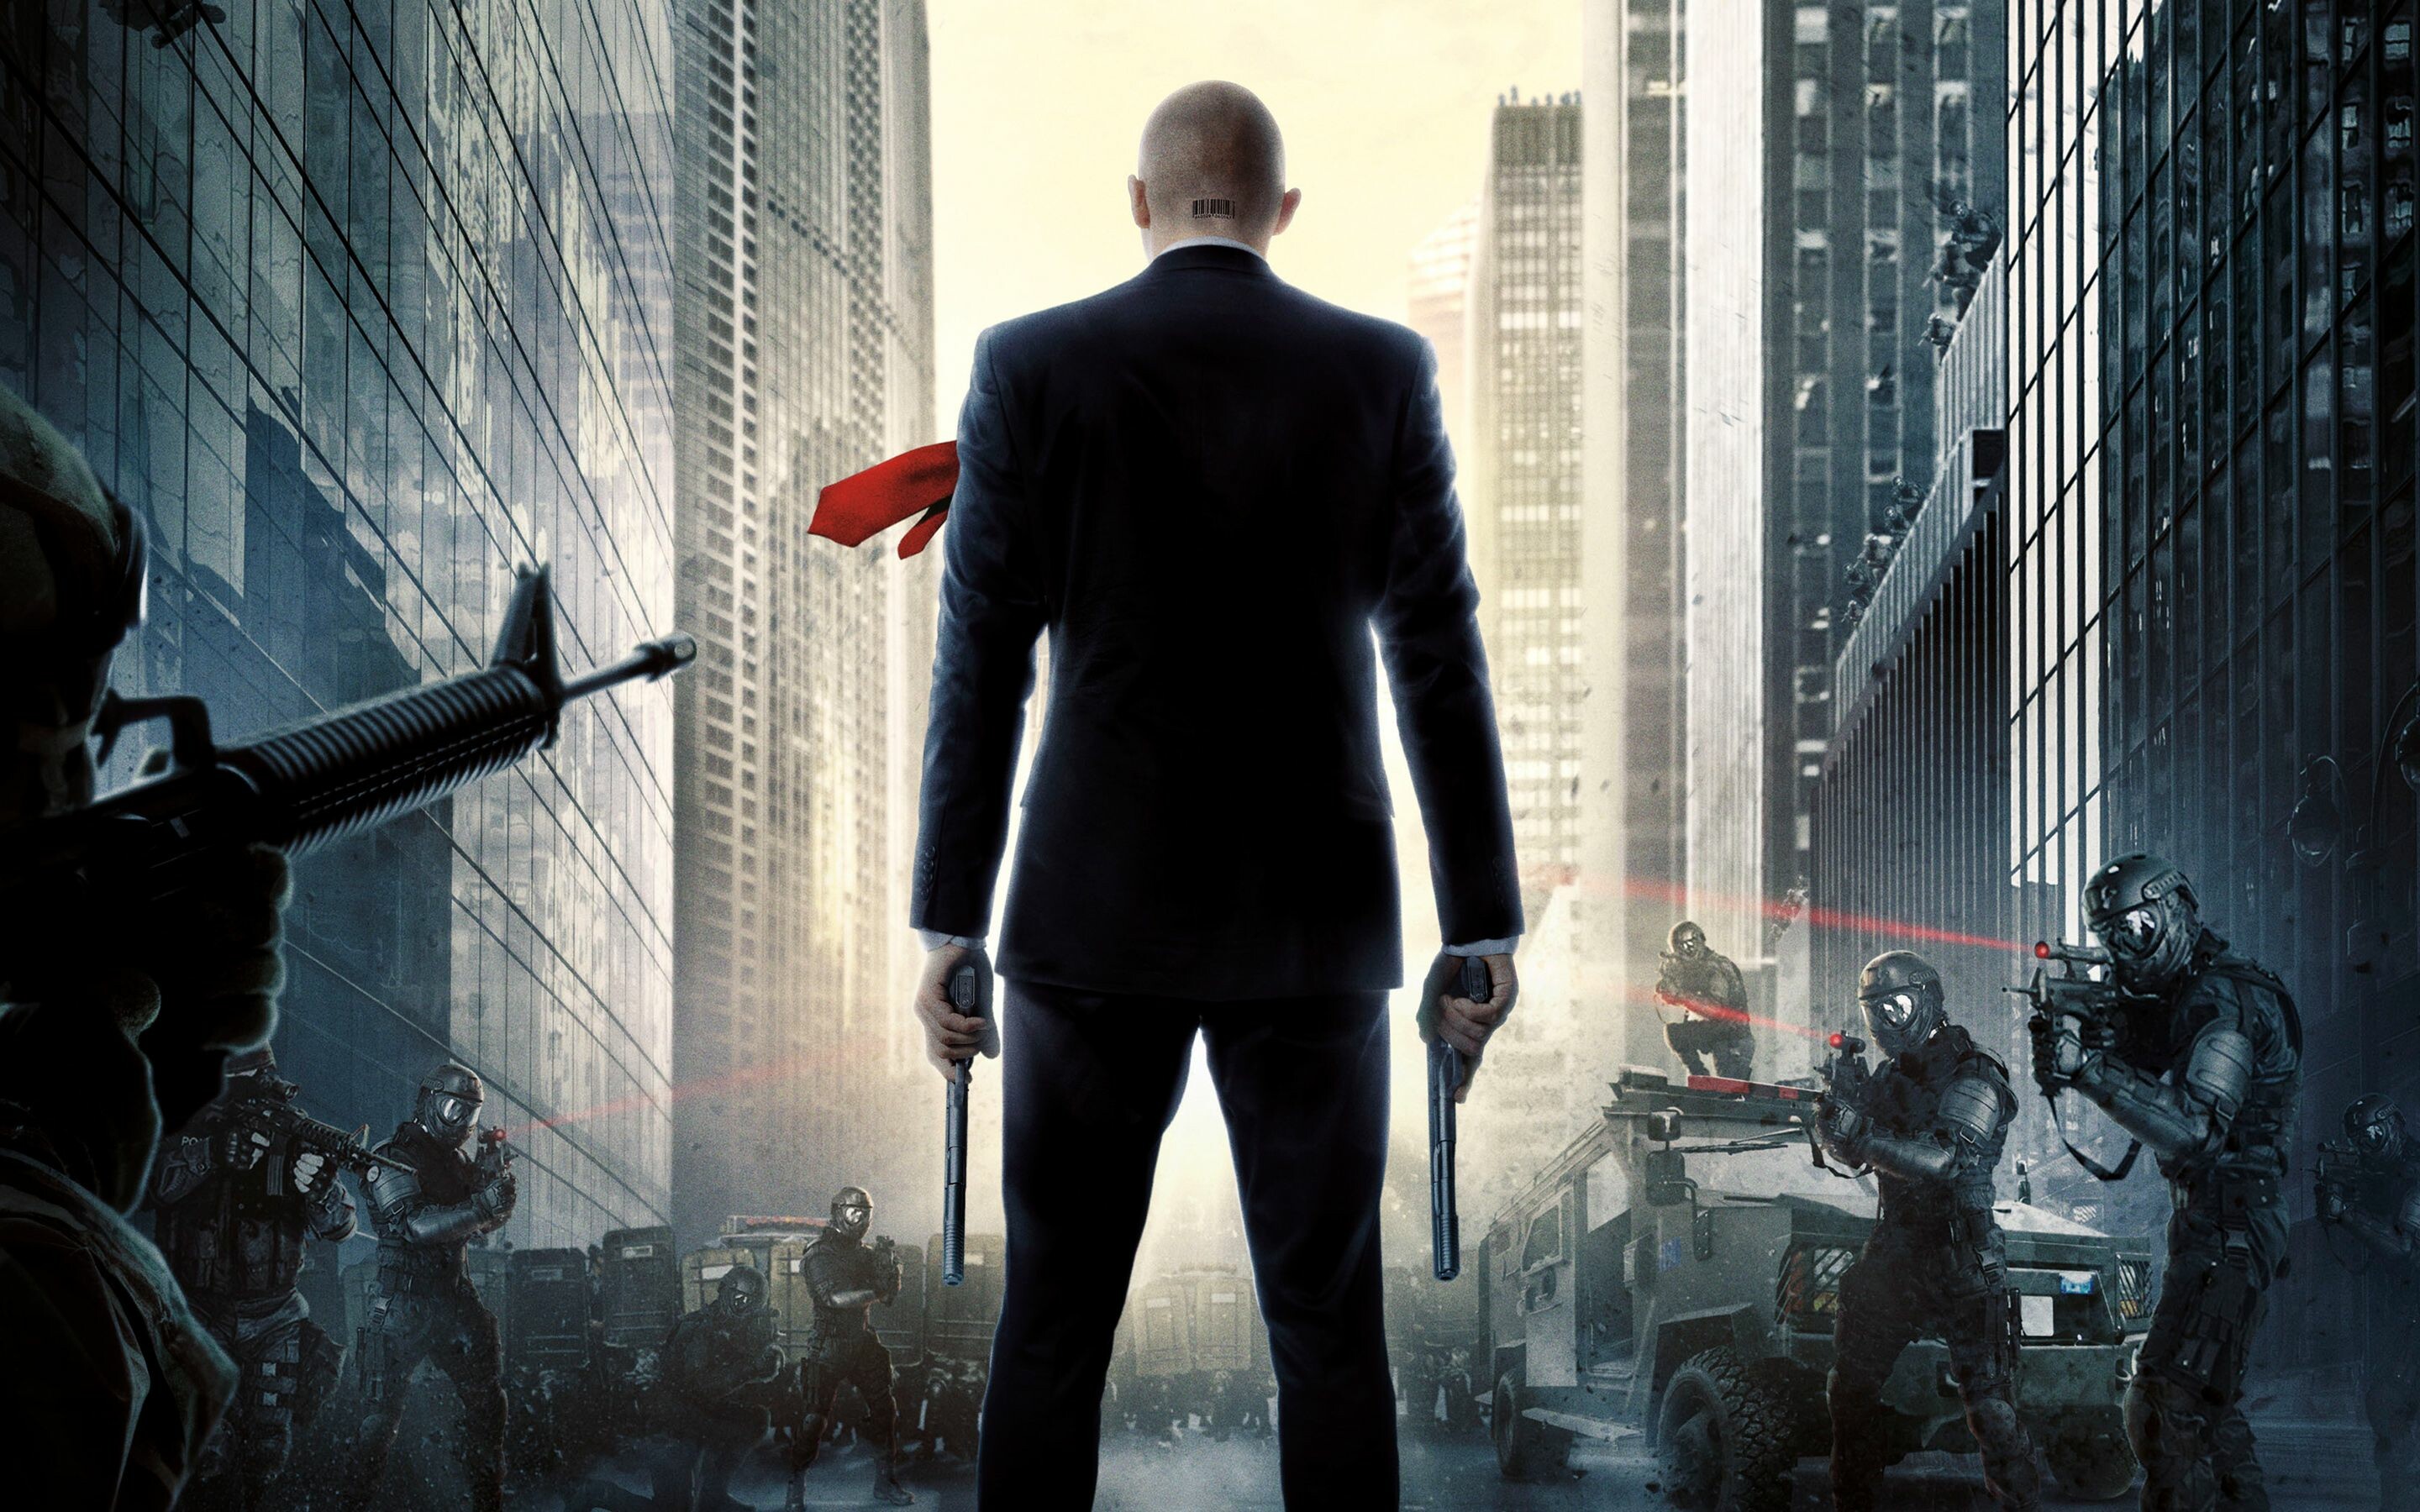 Hitman hd wallpapers hd images backgrounds